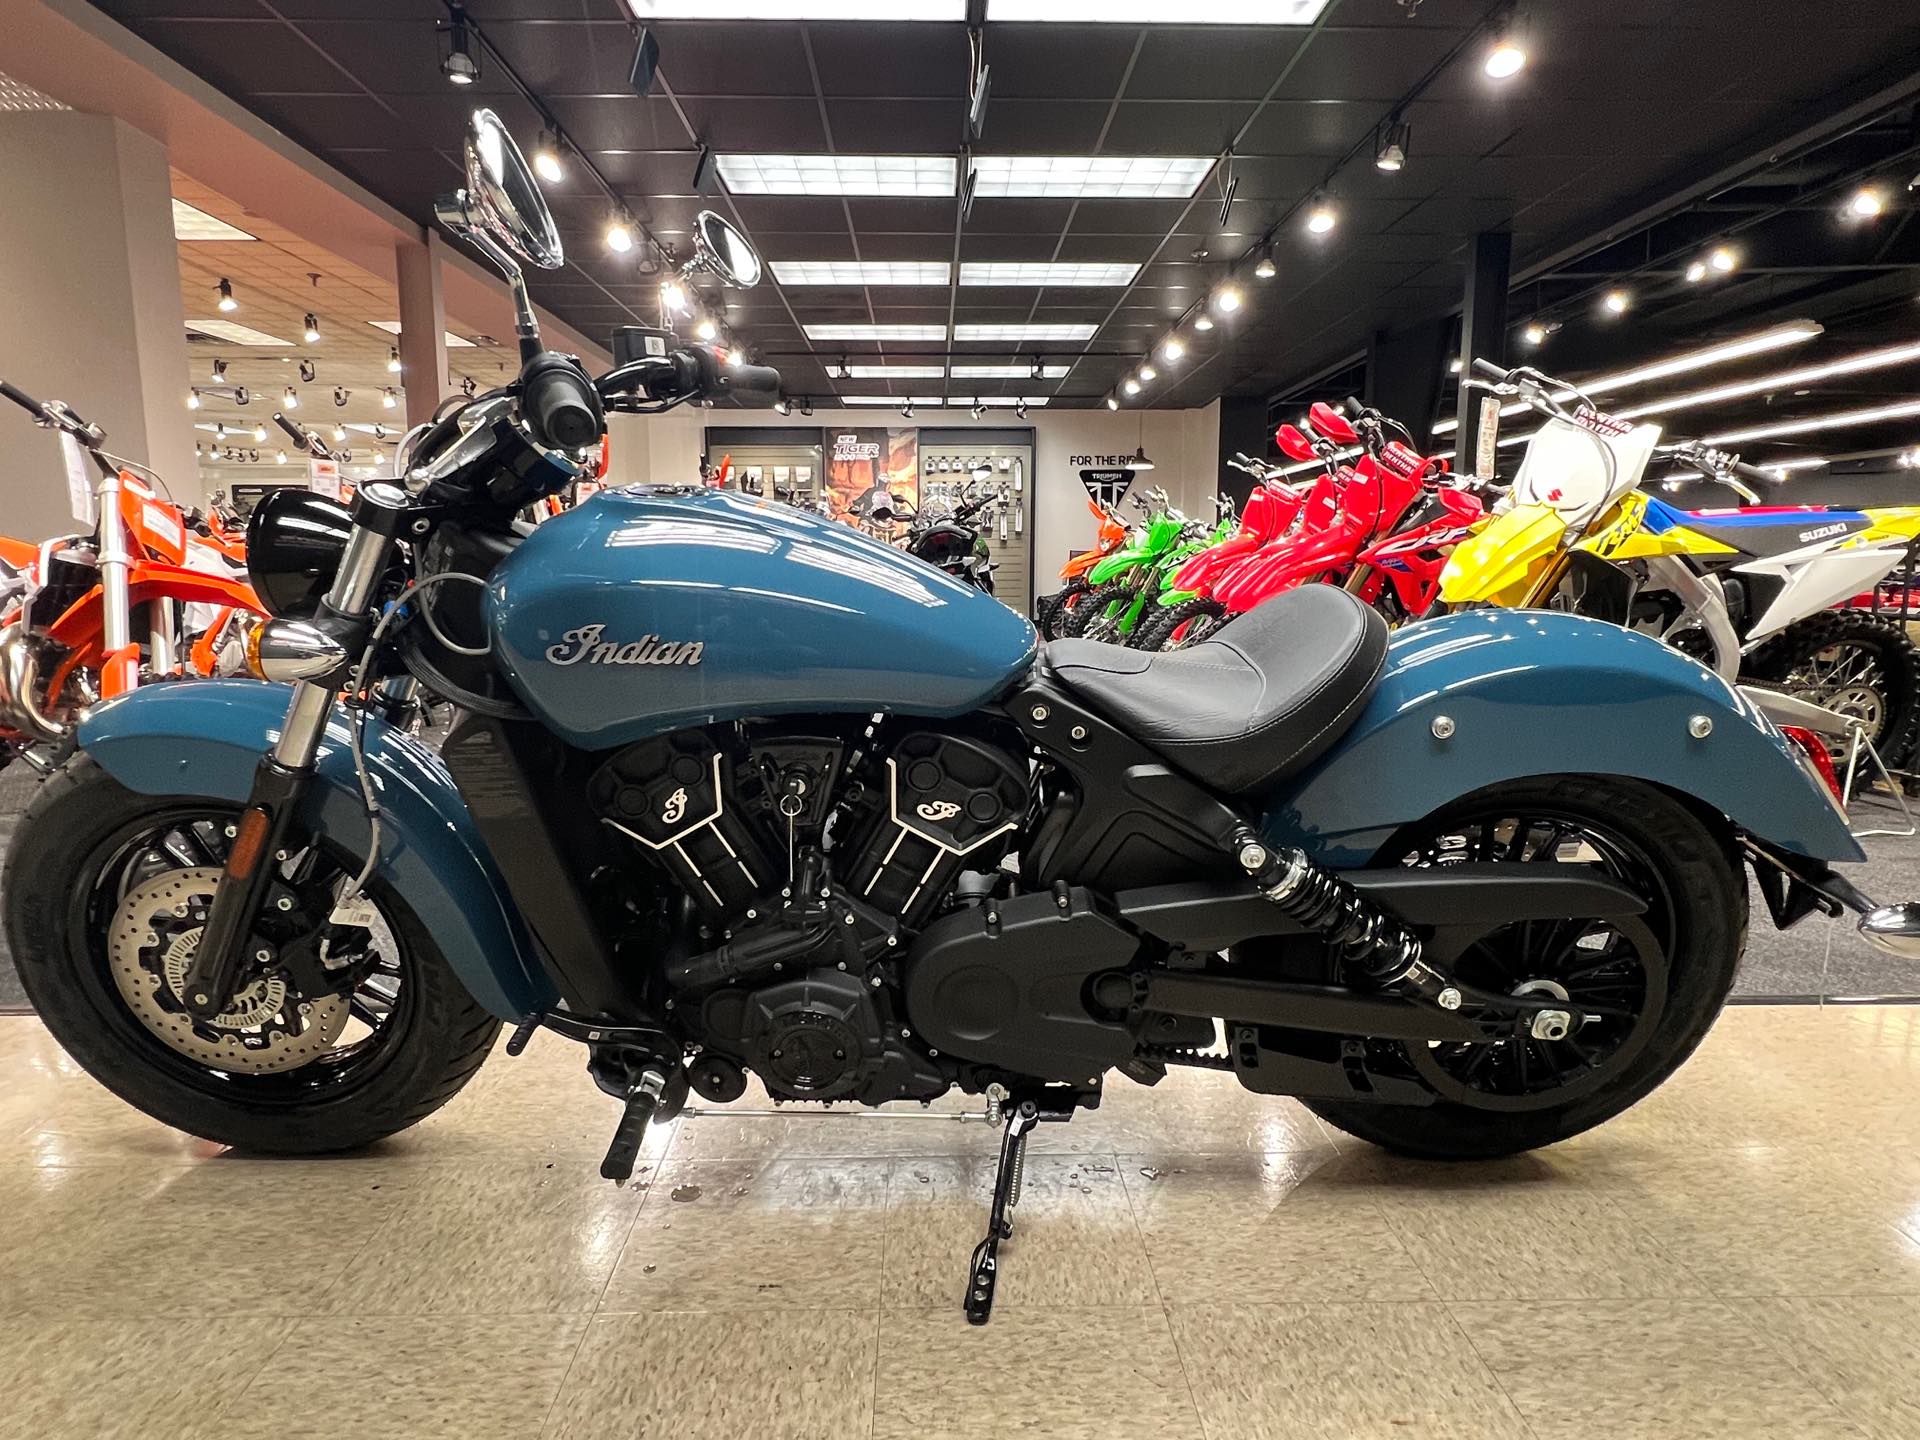 2023 Indian Motorcycle Scout Sixty at Sloans Motorcycle ATV, Murfreesboro, TN, 37129